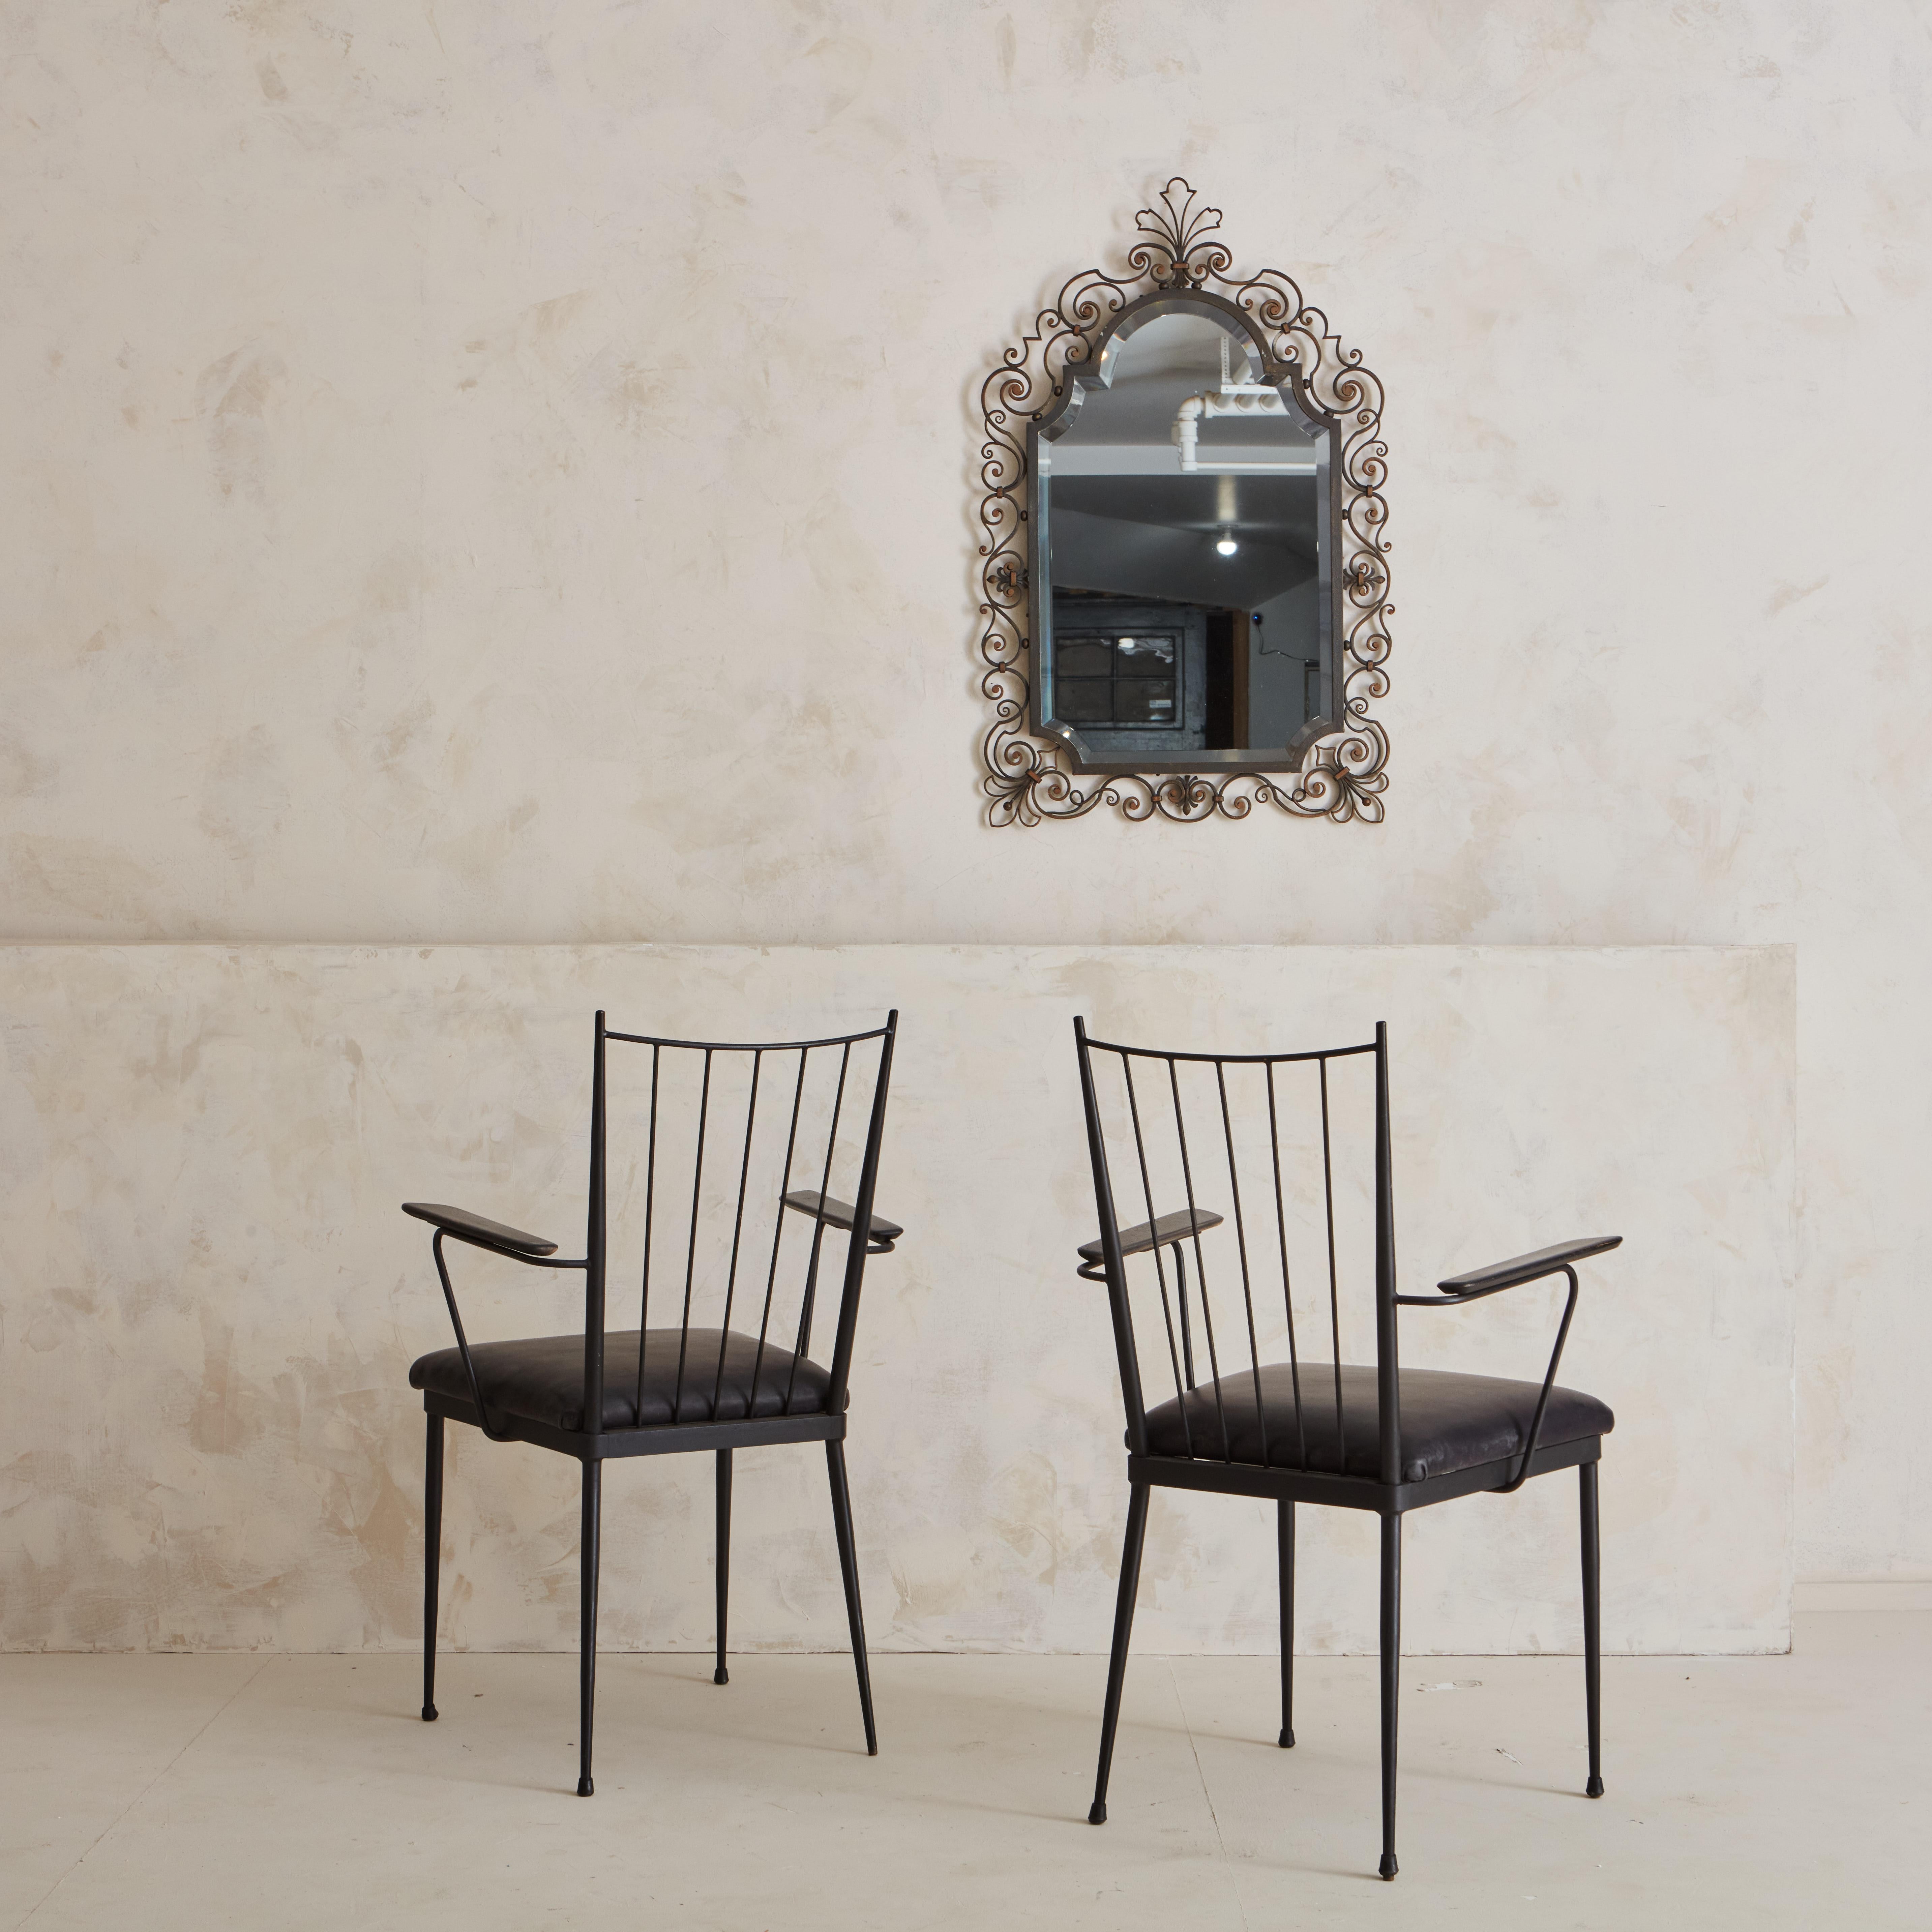 A pair of Iron Chairs by Colette Gueden, circa 1950s, featuring a leather seat and wooden armrests. Colette Gueden is a French designer, most known for her work produced by the design studio Primavera. Sourced in Southern France.